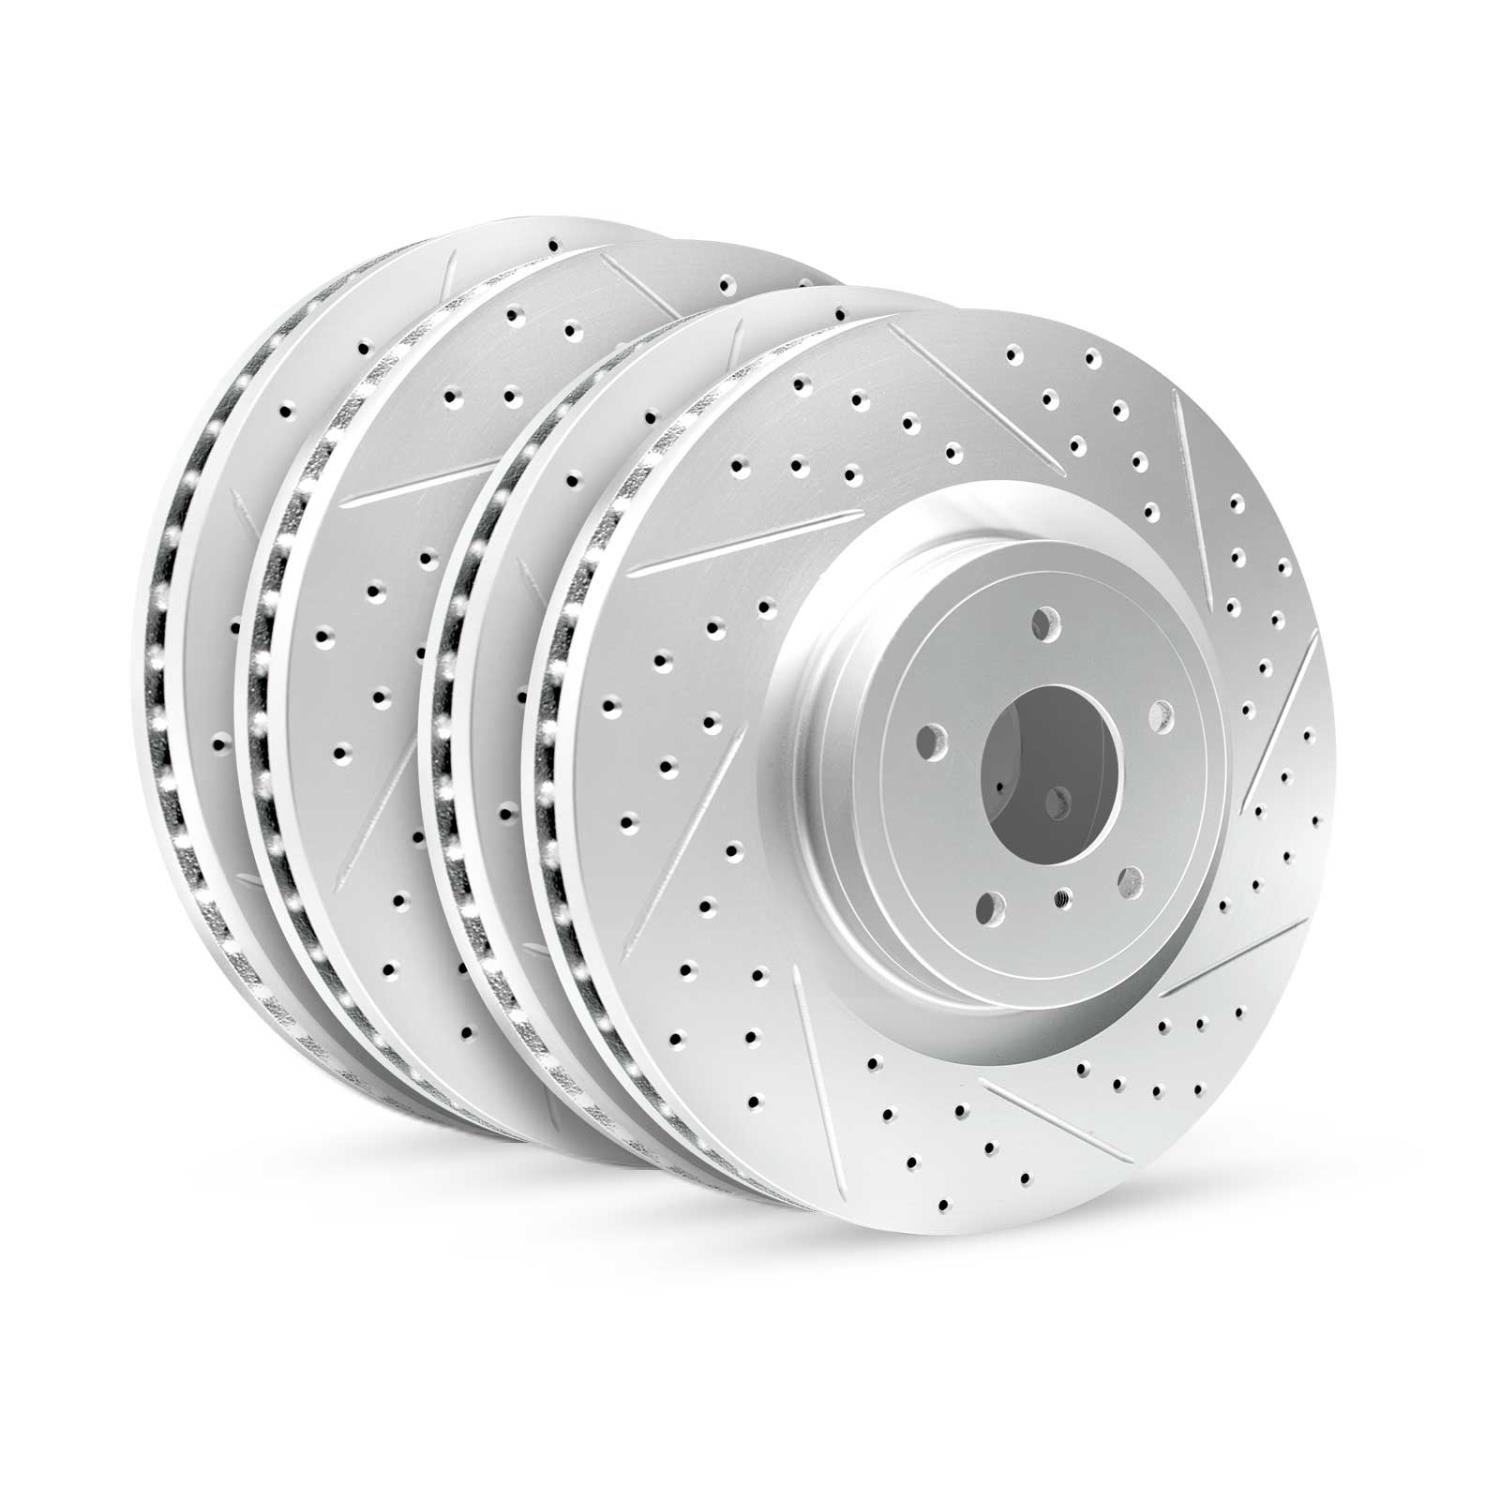 GEO-Carbon Drilled/Slotted Rotors, 2010-2015 Acura/Honda, Position: Front/Rear